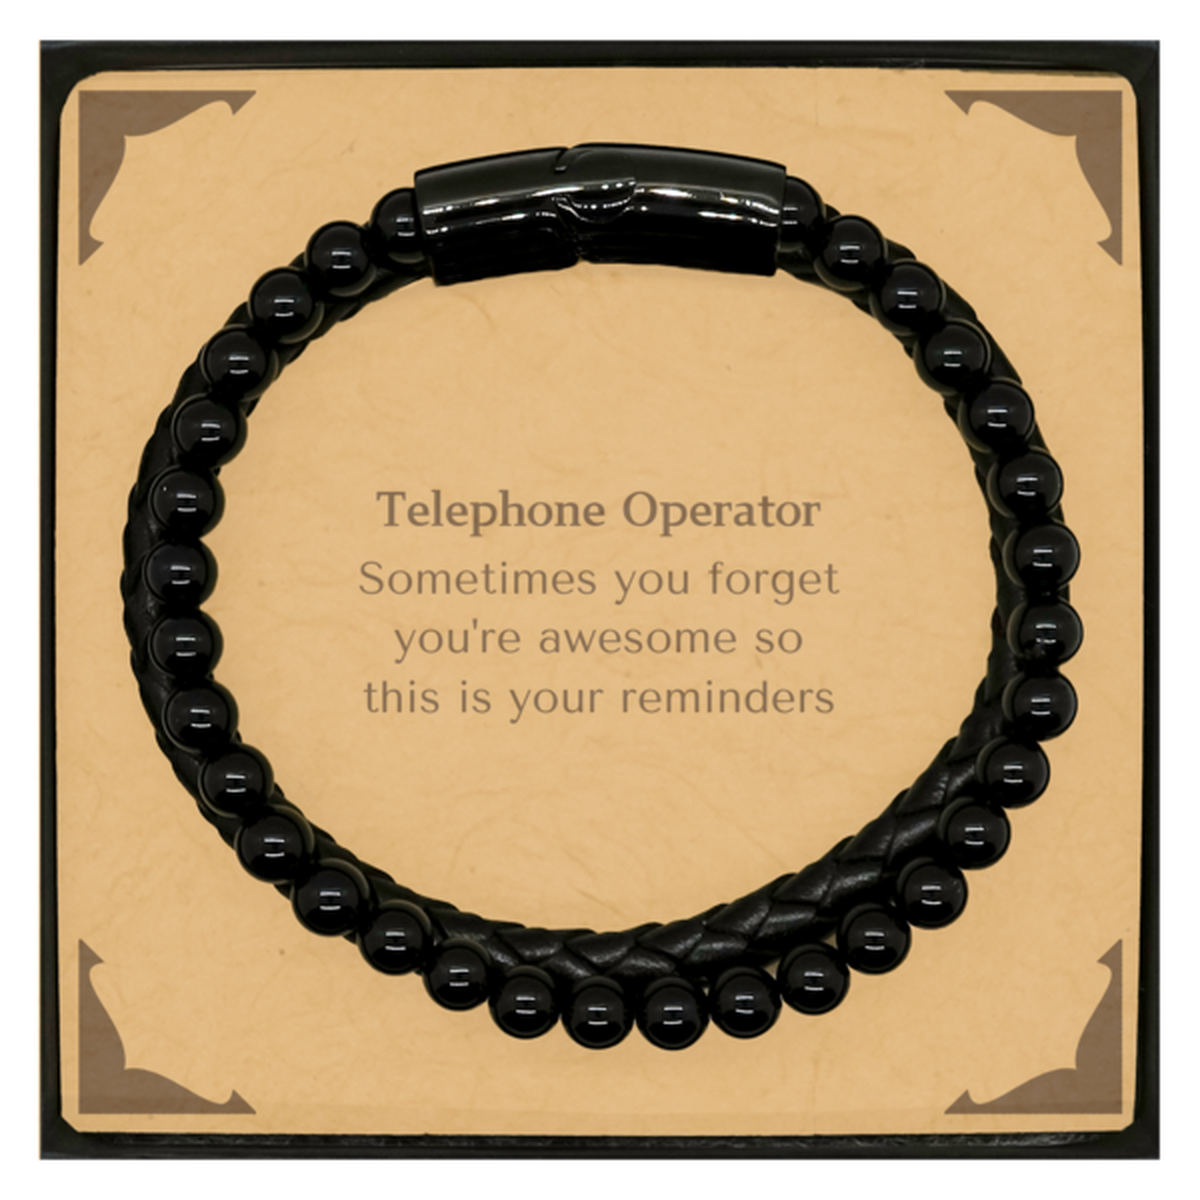 Sentimental Telephone Operator Stone Leather Bracelets, Telephone Operator Sometimes you forget you're awesome so this is your reminders, Graduation Christmas Birthday Gifts for Telephone Operator, Men, Women, Coworkers